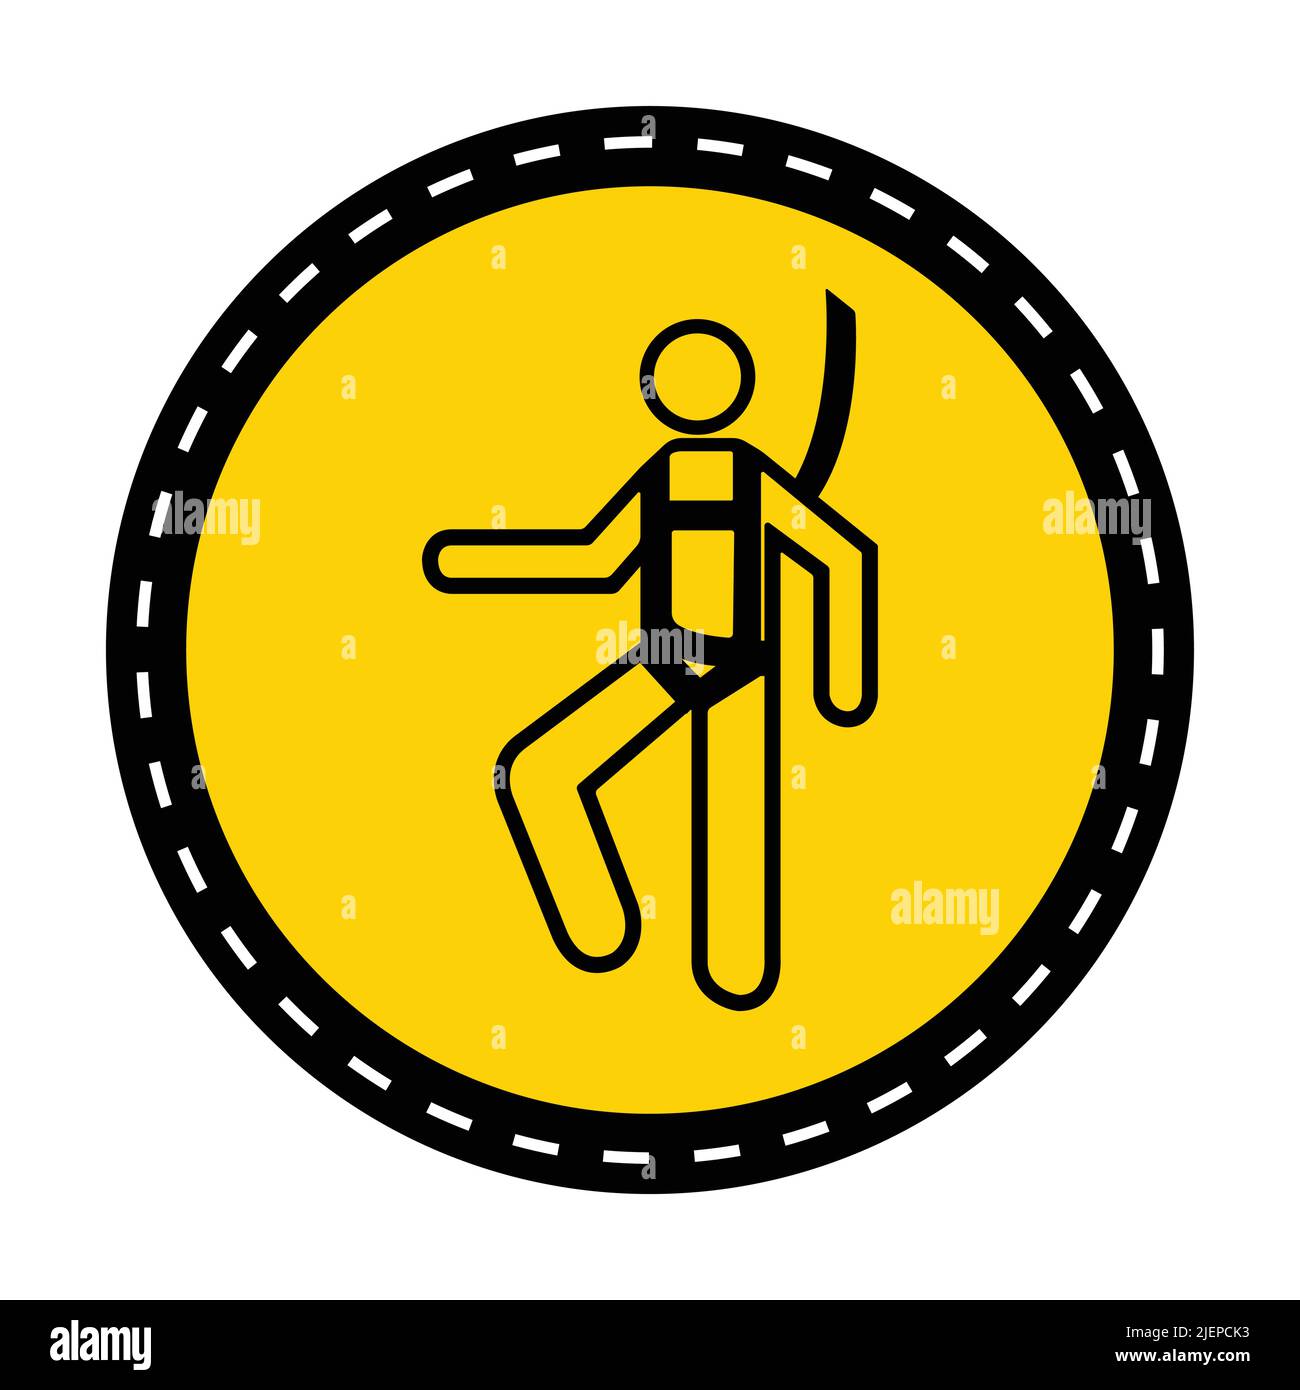 Symbol Wear Safety Harness Sign on white background,vector illustration Stock Vector